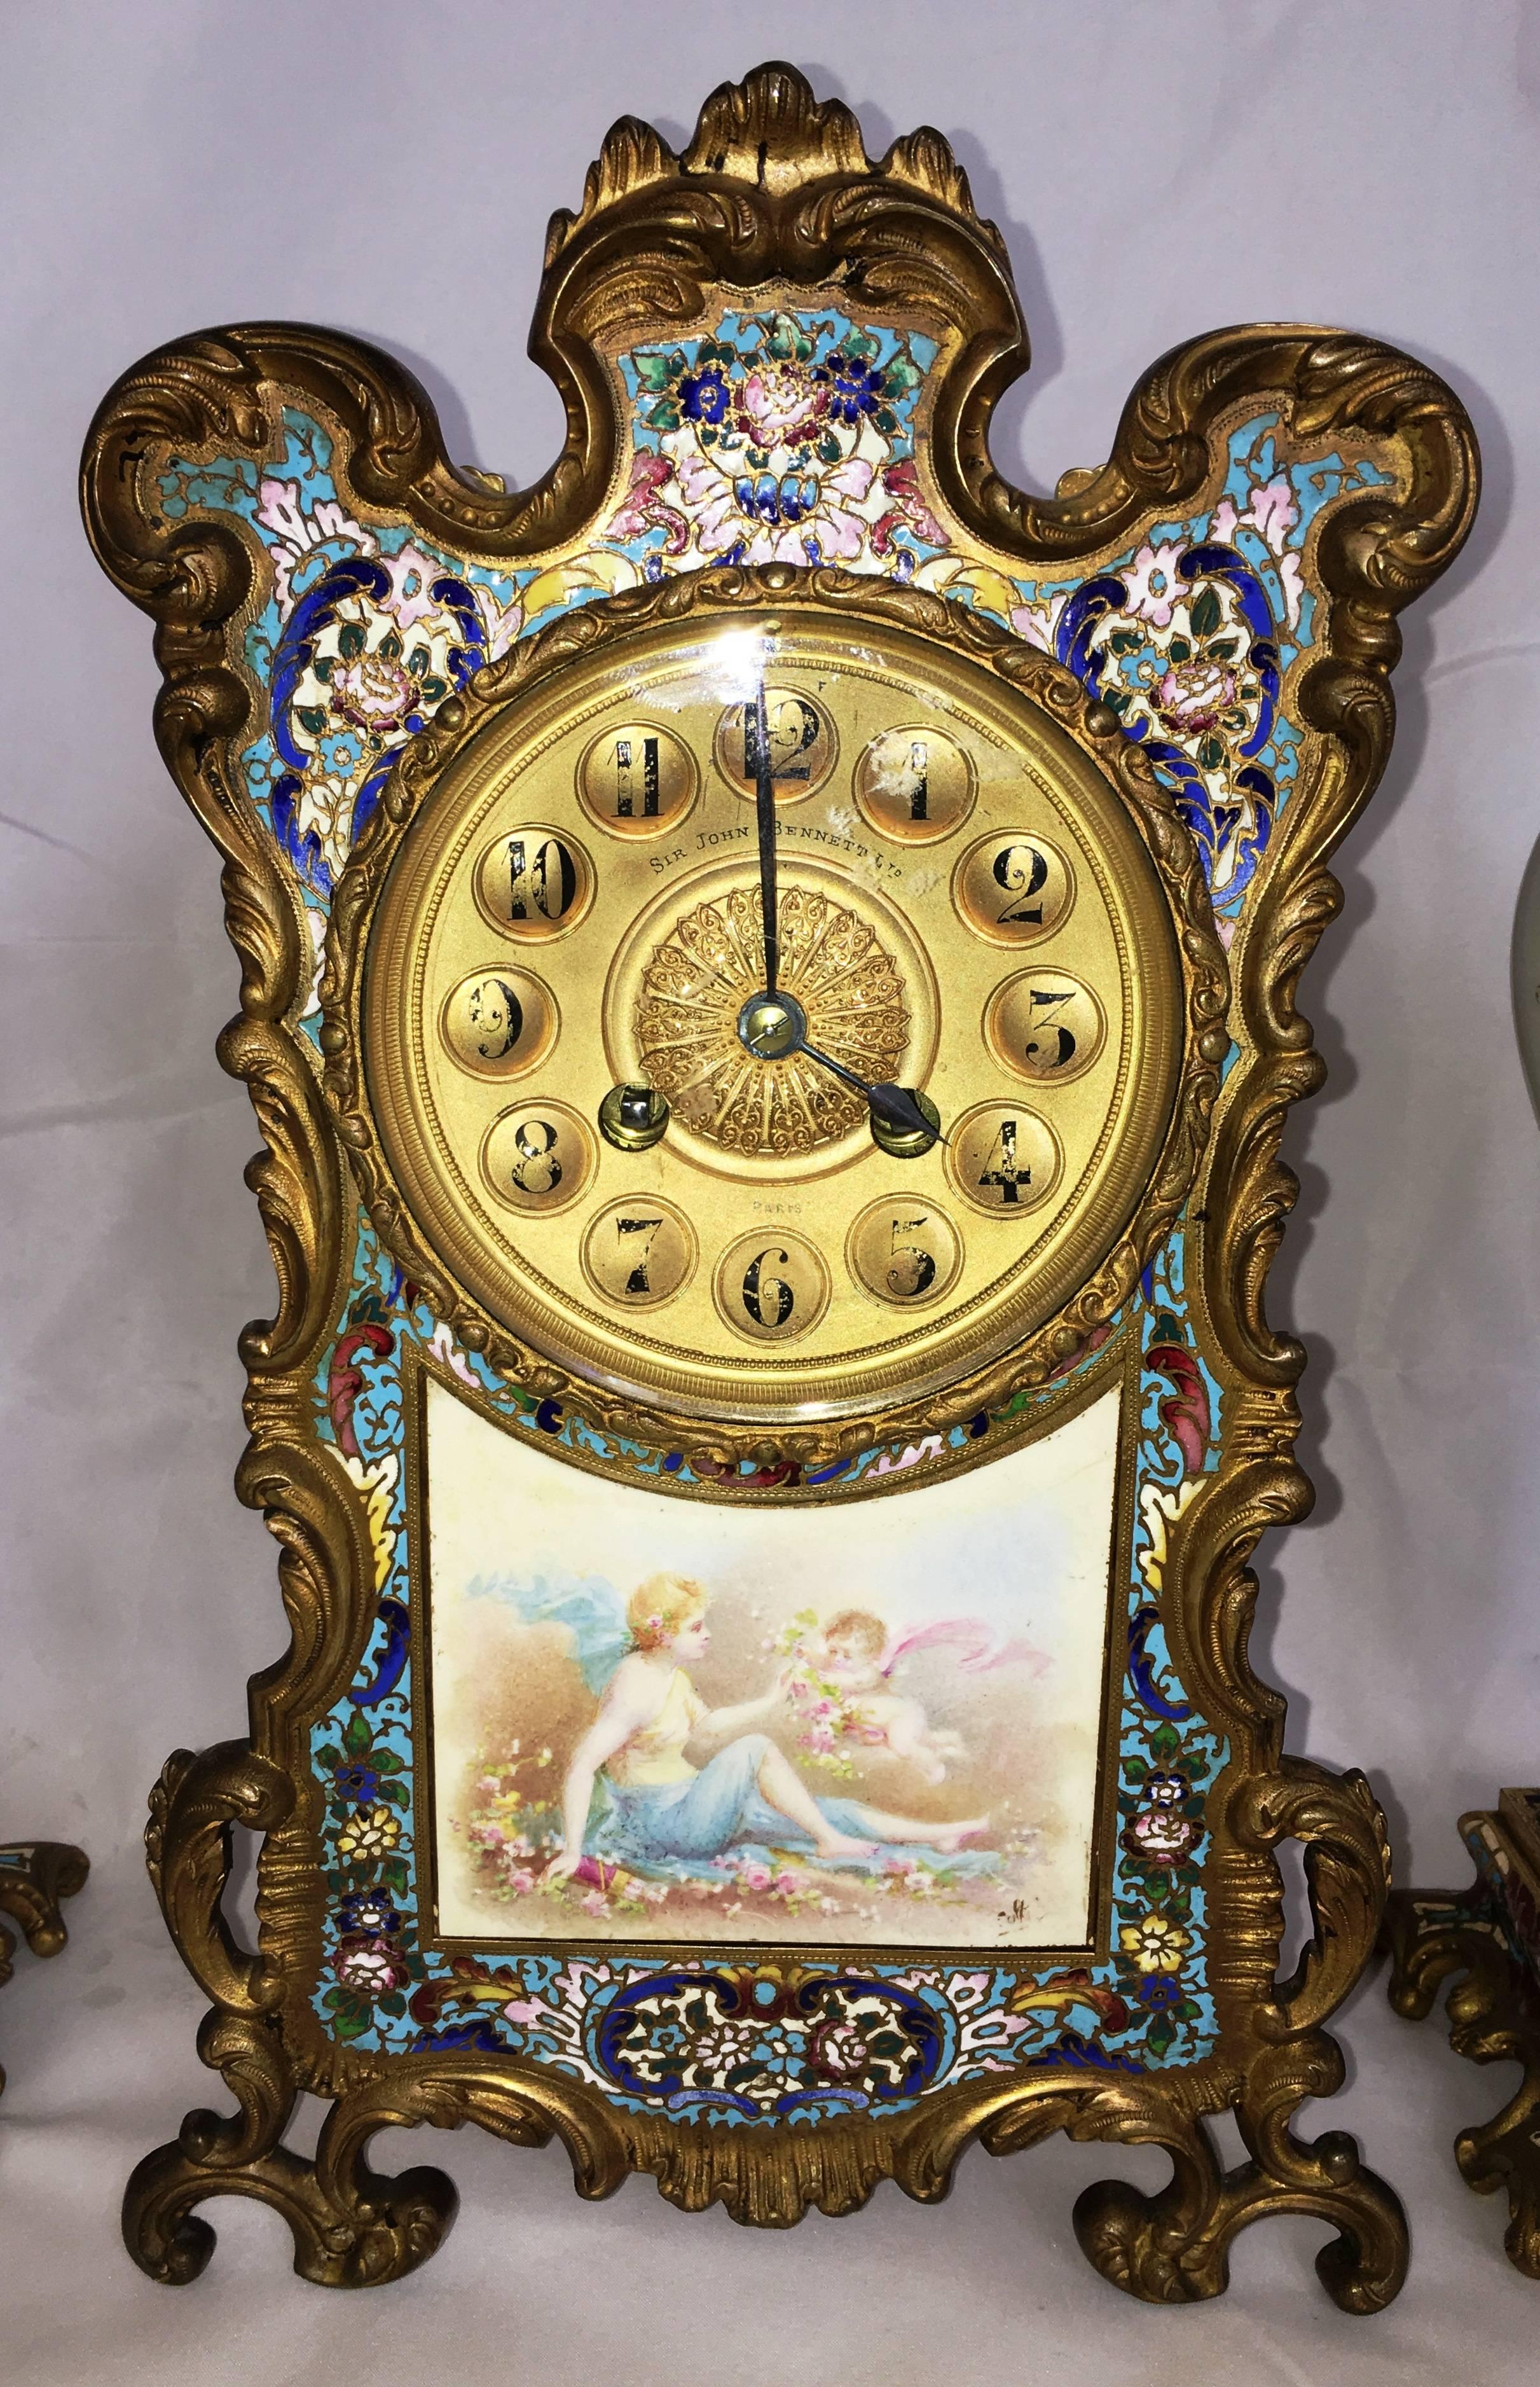 A very good quality late 19th Century French Louis XVI style Champleve enamel clock set. The clock having a classical scene of a cherub handing flowers to a young maiden. the boarder of the clock having wonderful colored enamel set in an gilded